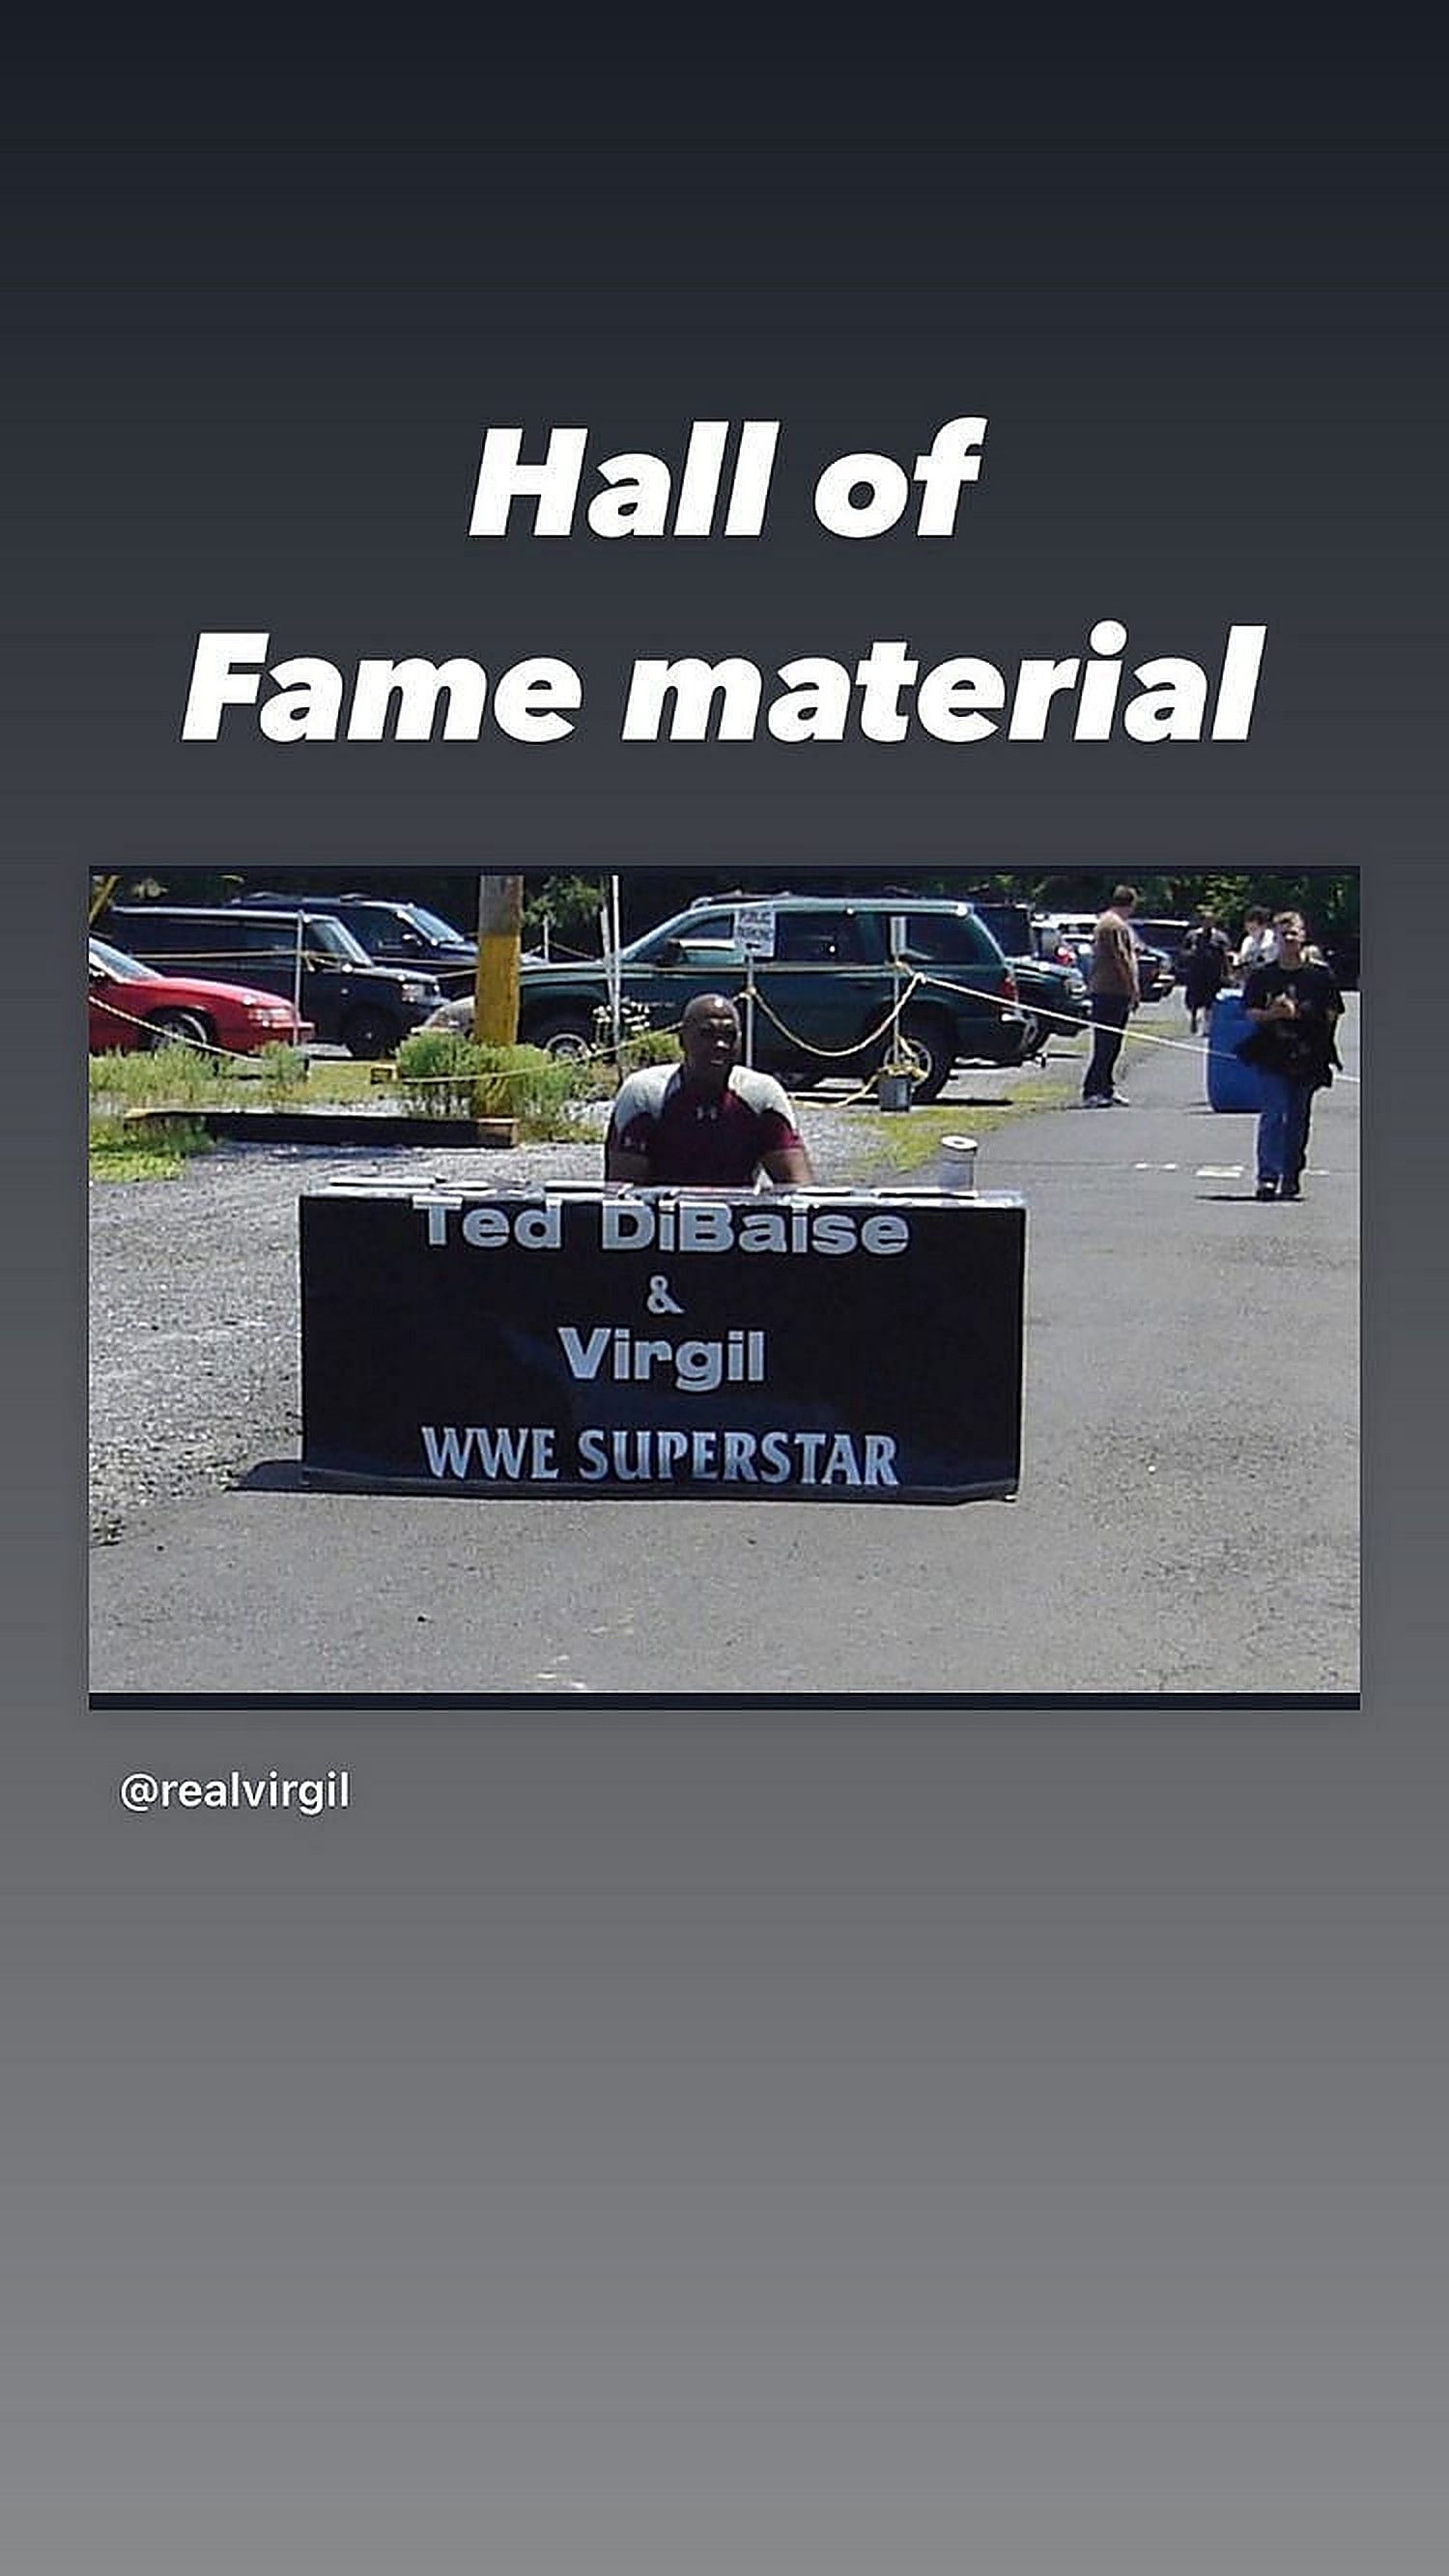 Virgil dubs himself &quot;Hall of Fame material&quot;